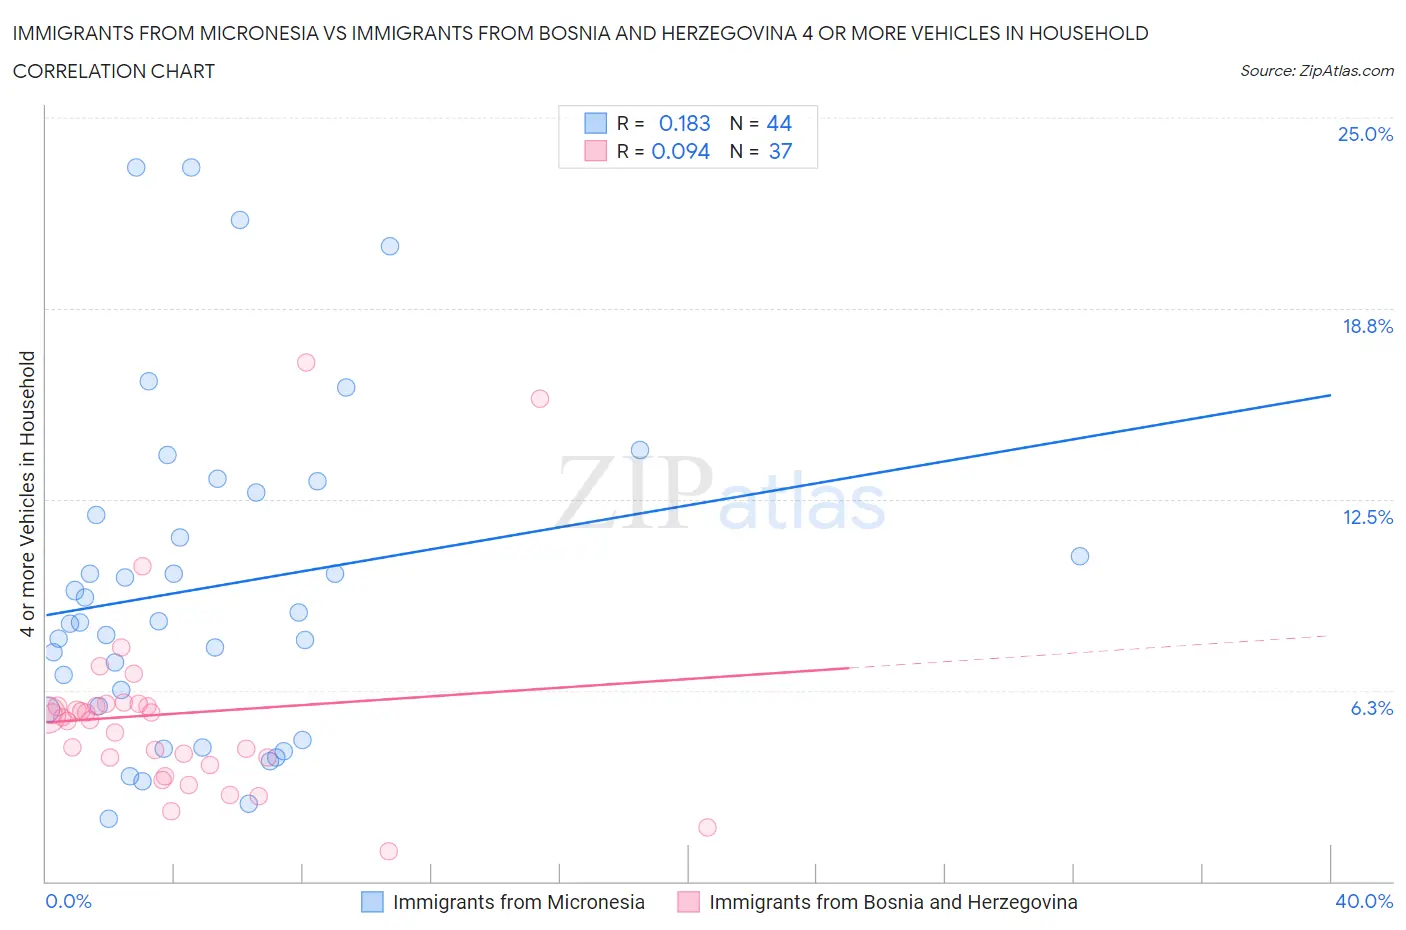 Immigrants from Micronesia vs Immigrants from Bosnia and Herzegovina 4 or more Vehicles in Household